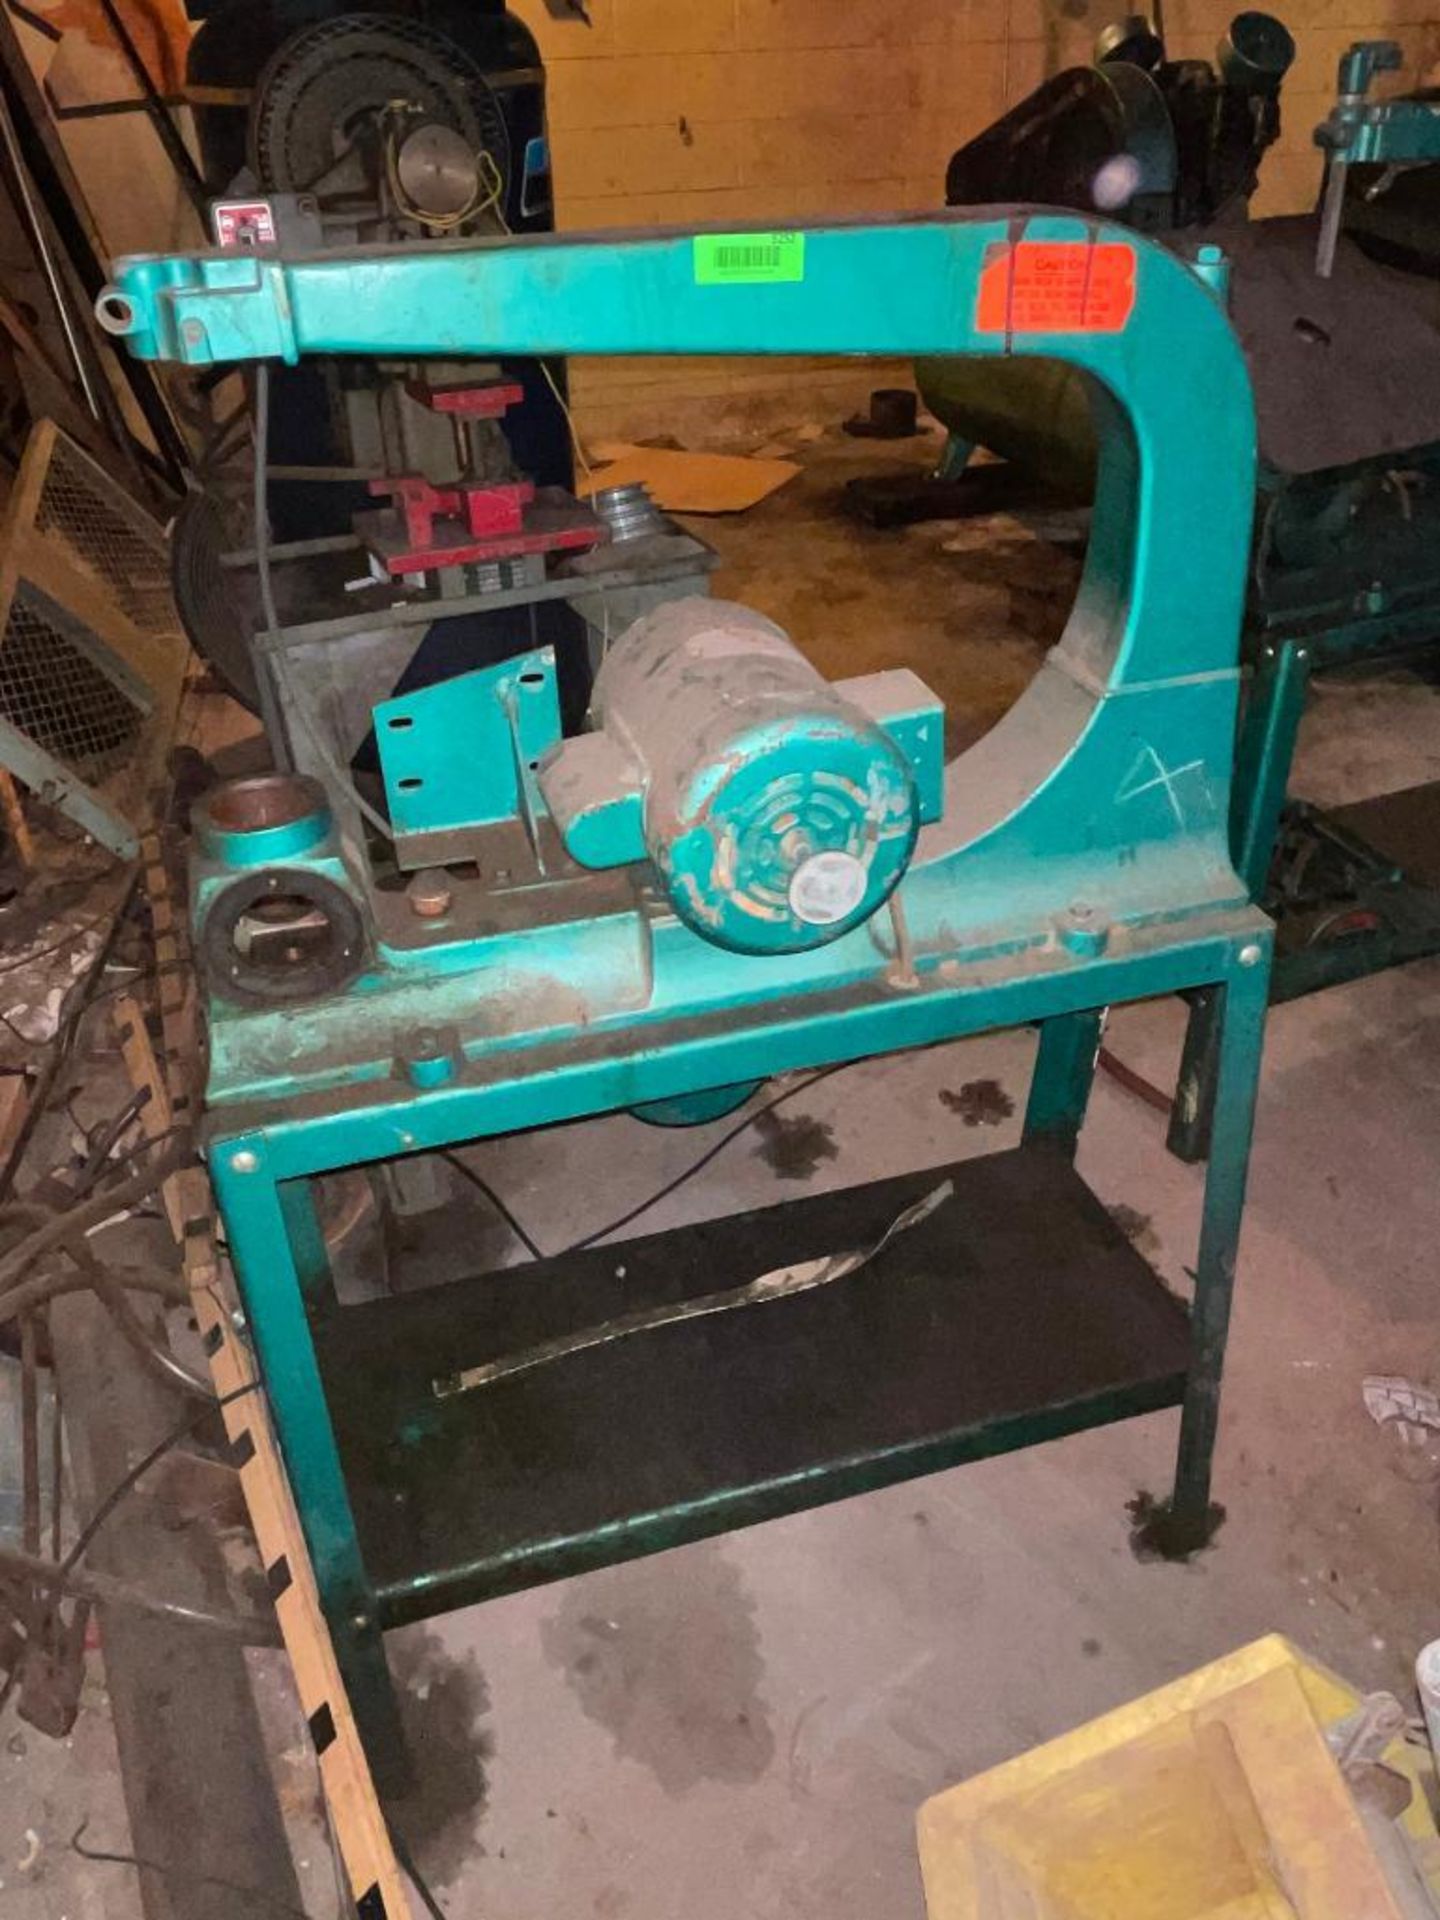 DESCRIPTION: CHICAGO MACHINE TOOL SCROLL SAW. ADDITIONAL INFORMATION NOT IN WORKING ORDER QTY: 1